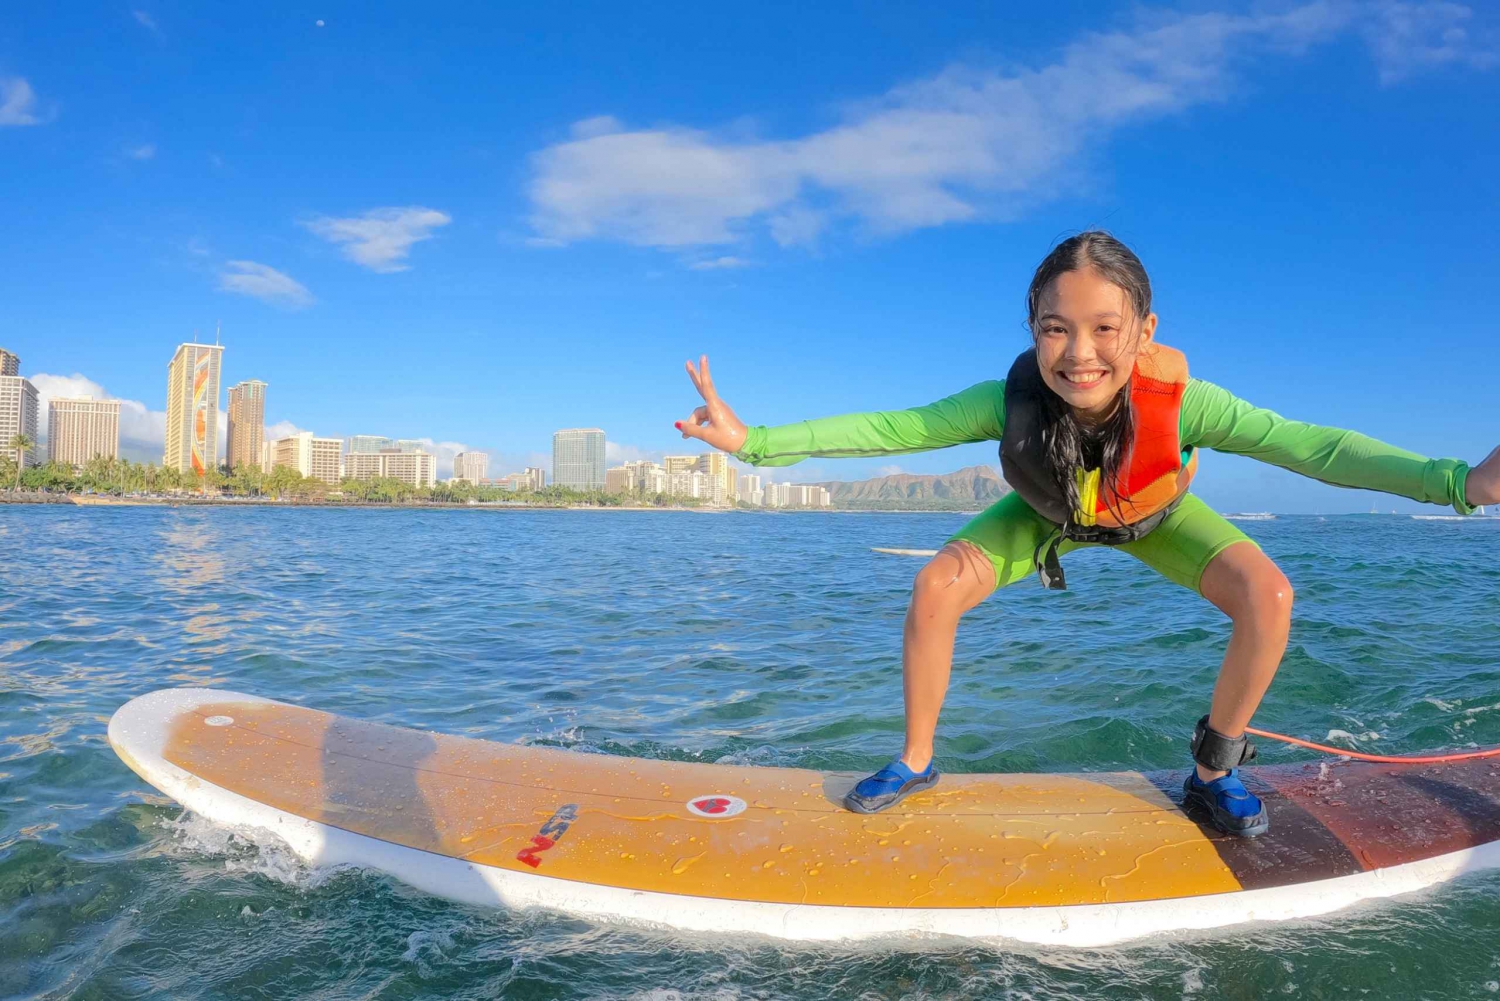 Oahu: Kids Surfing Lesson in Waikiki Beach (up to 12)